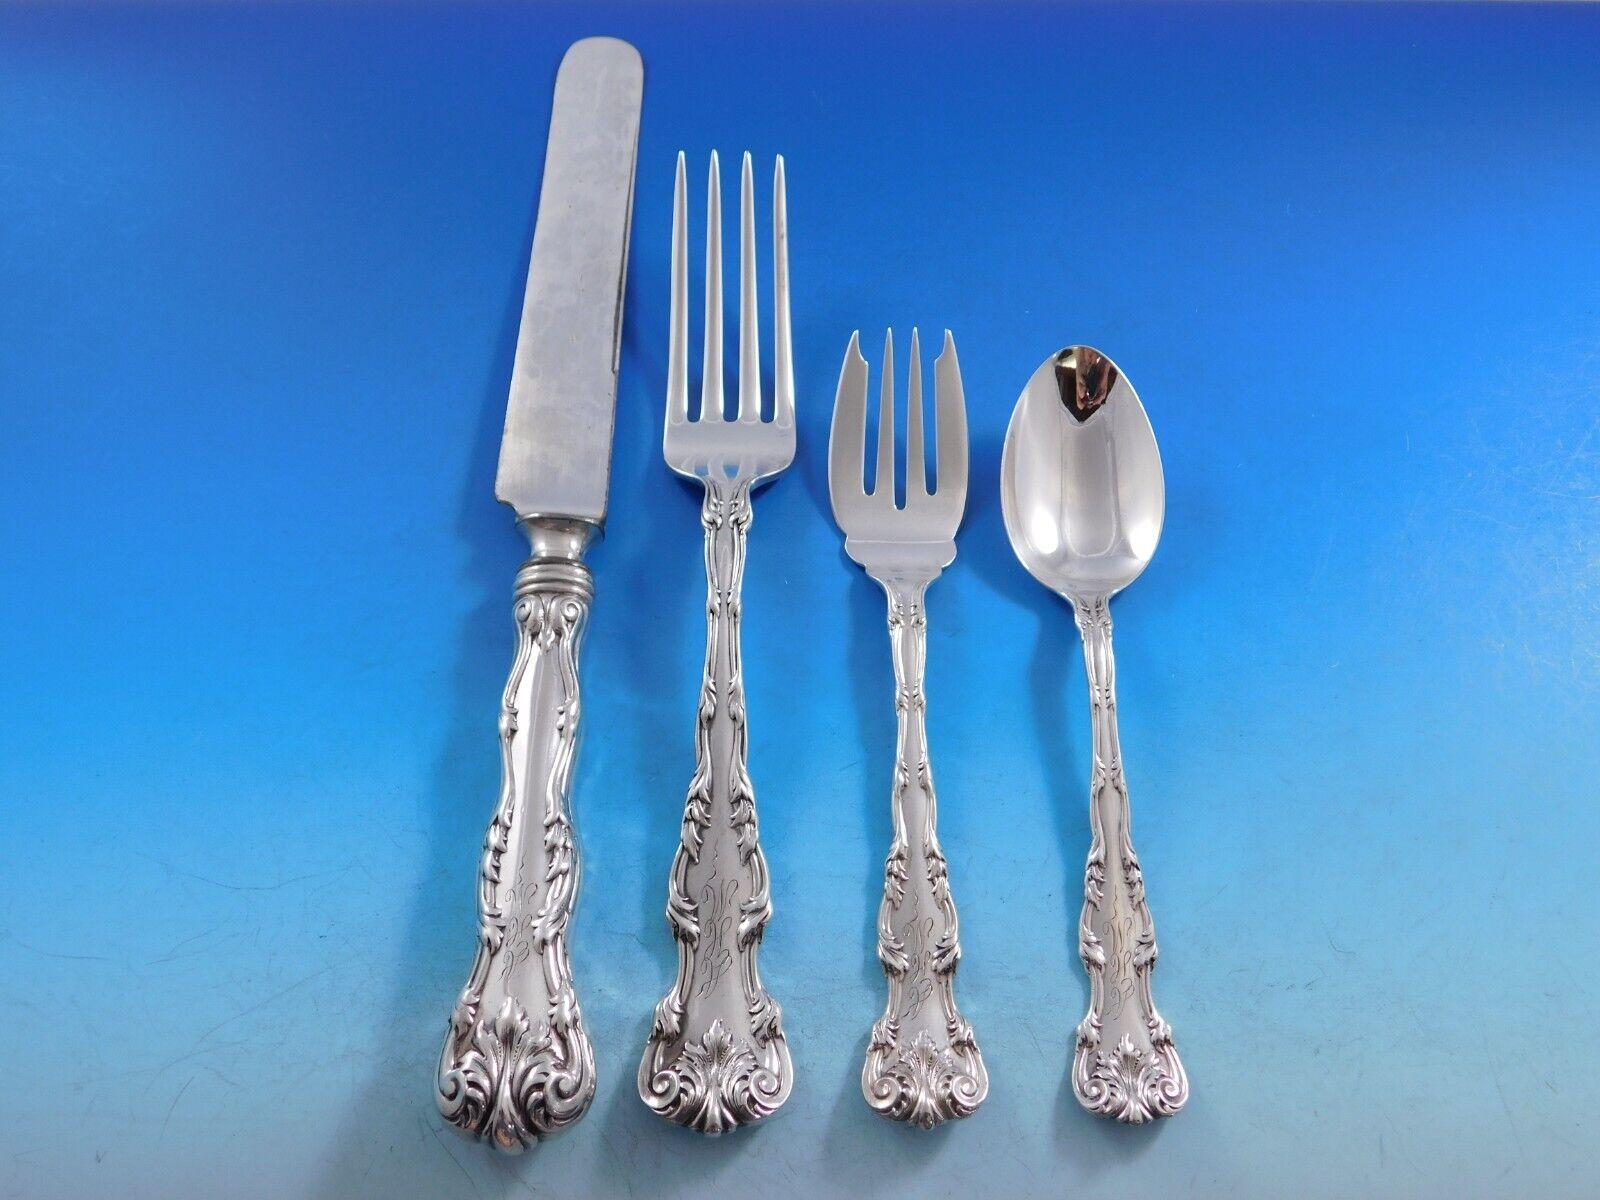 Dinner Victoria by Dominick and Haff c1901 Sterling Silver flatware set - 26 pieces. Great starter set! This set includes:

6 Dinner Size Knives, with new blunt stainless blades, 9 3/4